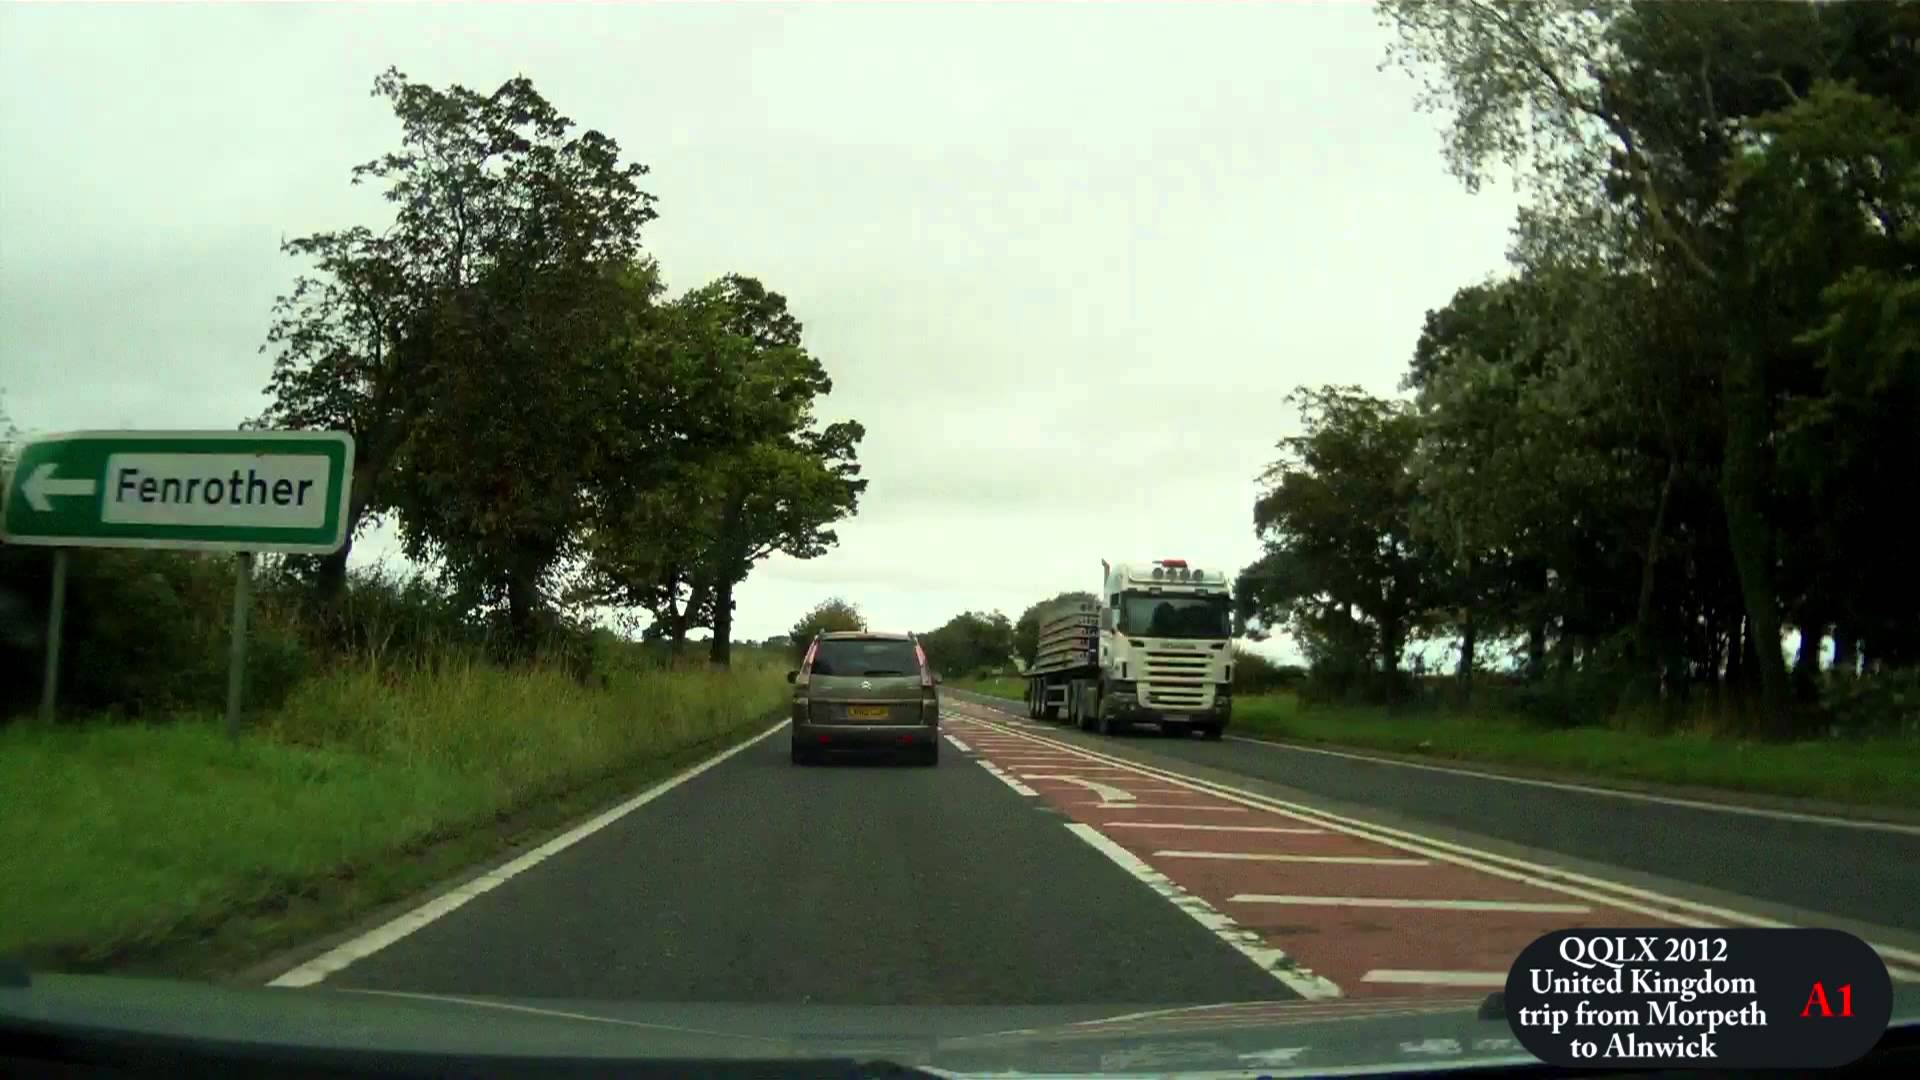 The A1 road 2013